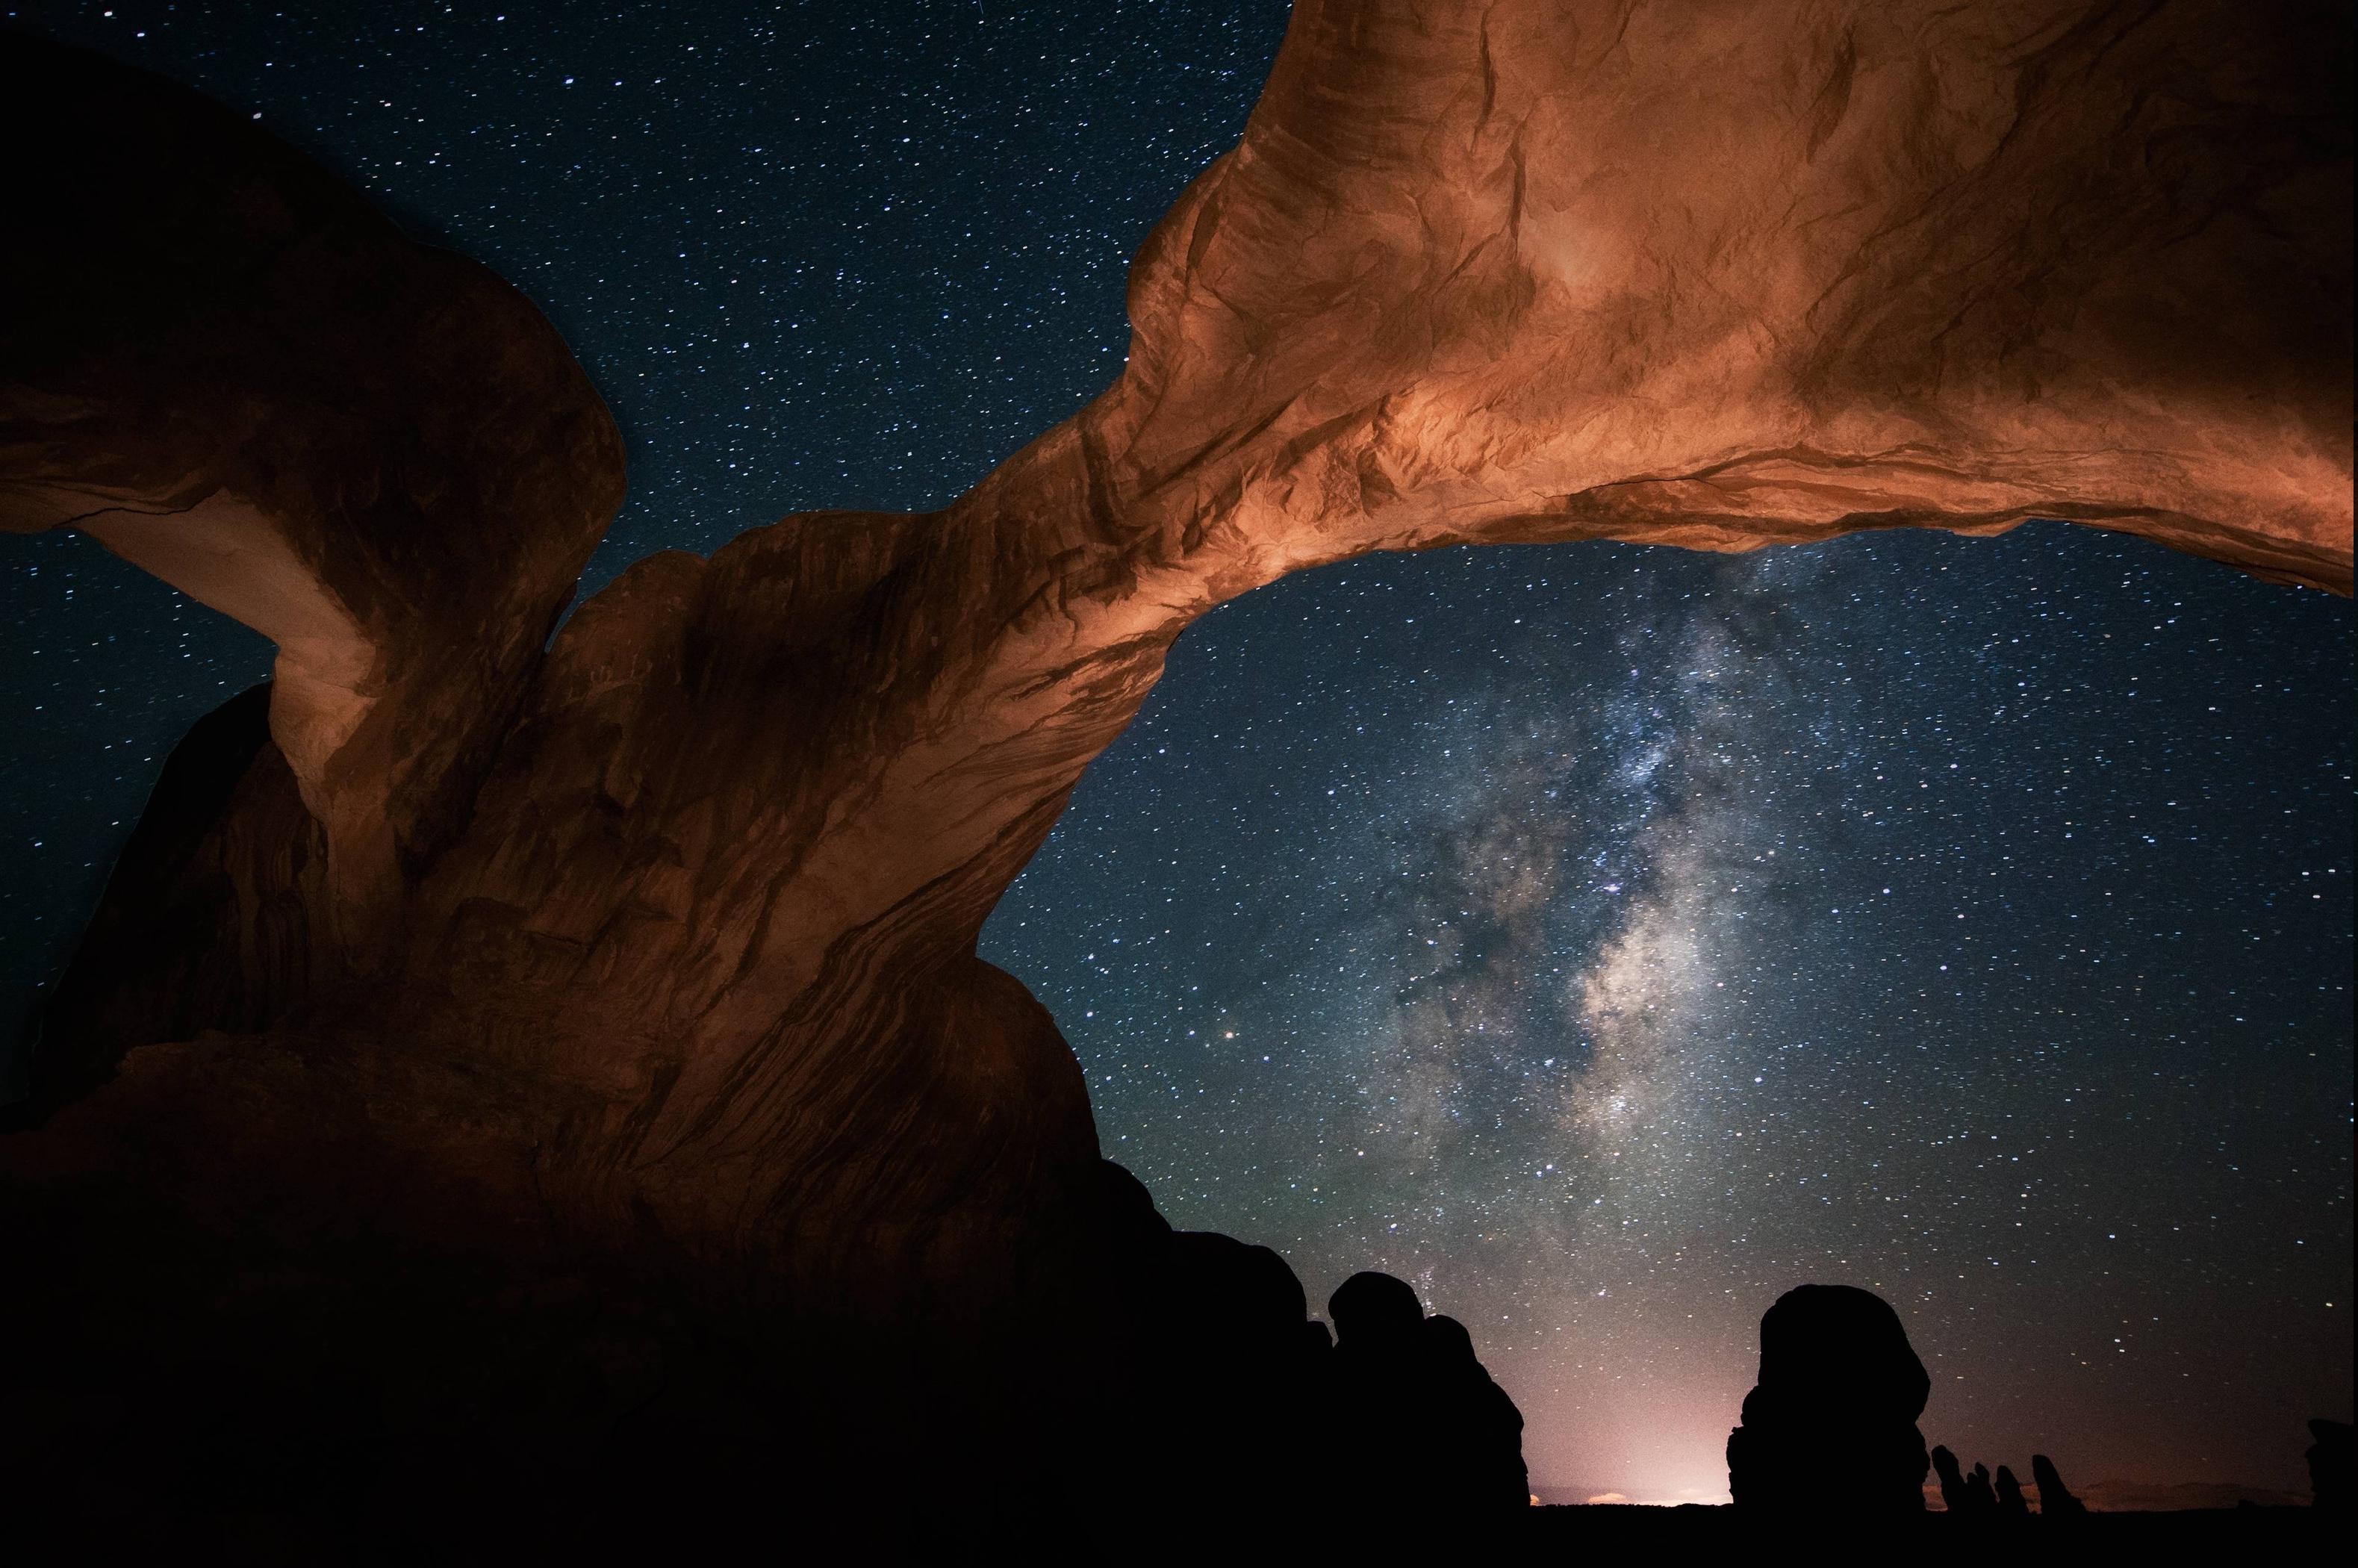 space, Nebula, Arch, Night, Milky Way, Rock Formation, Nature, Landscape, Silhouette Wallpaper